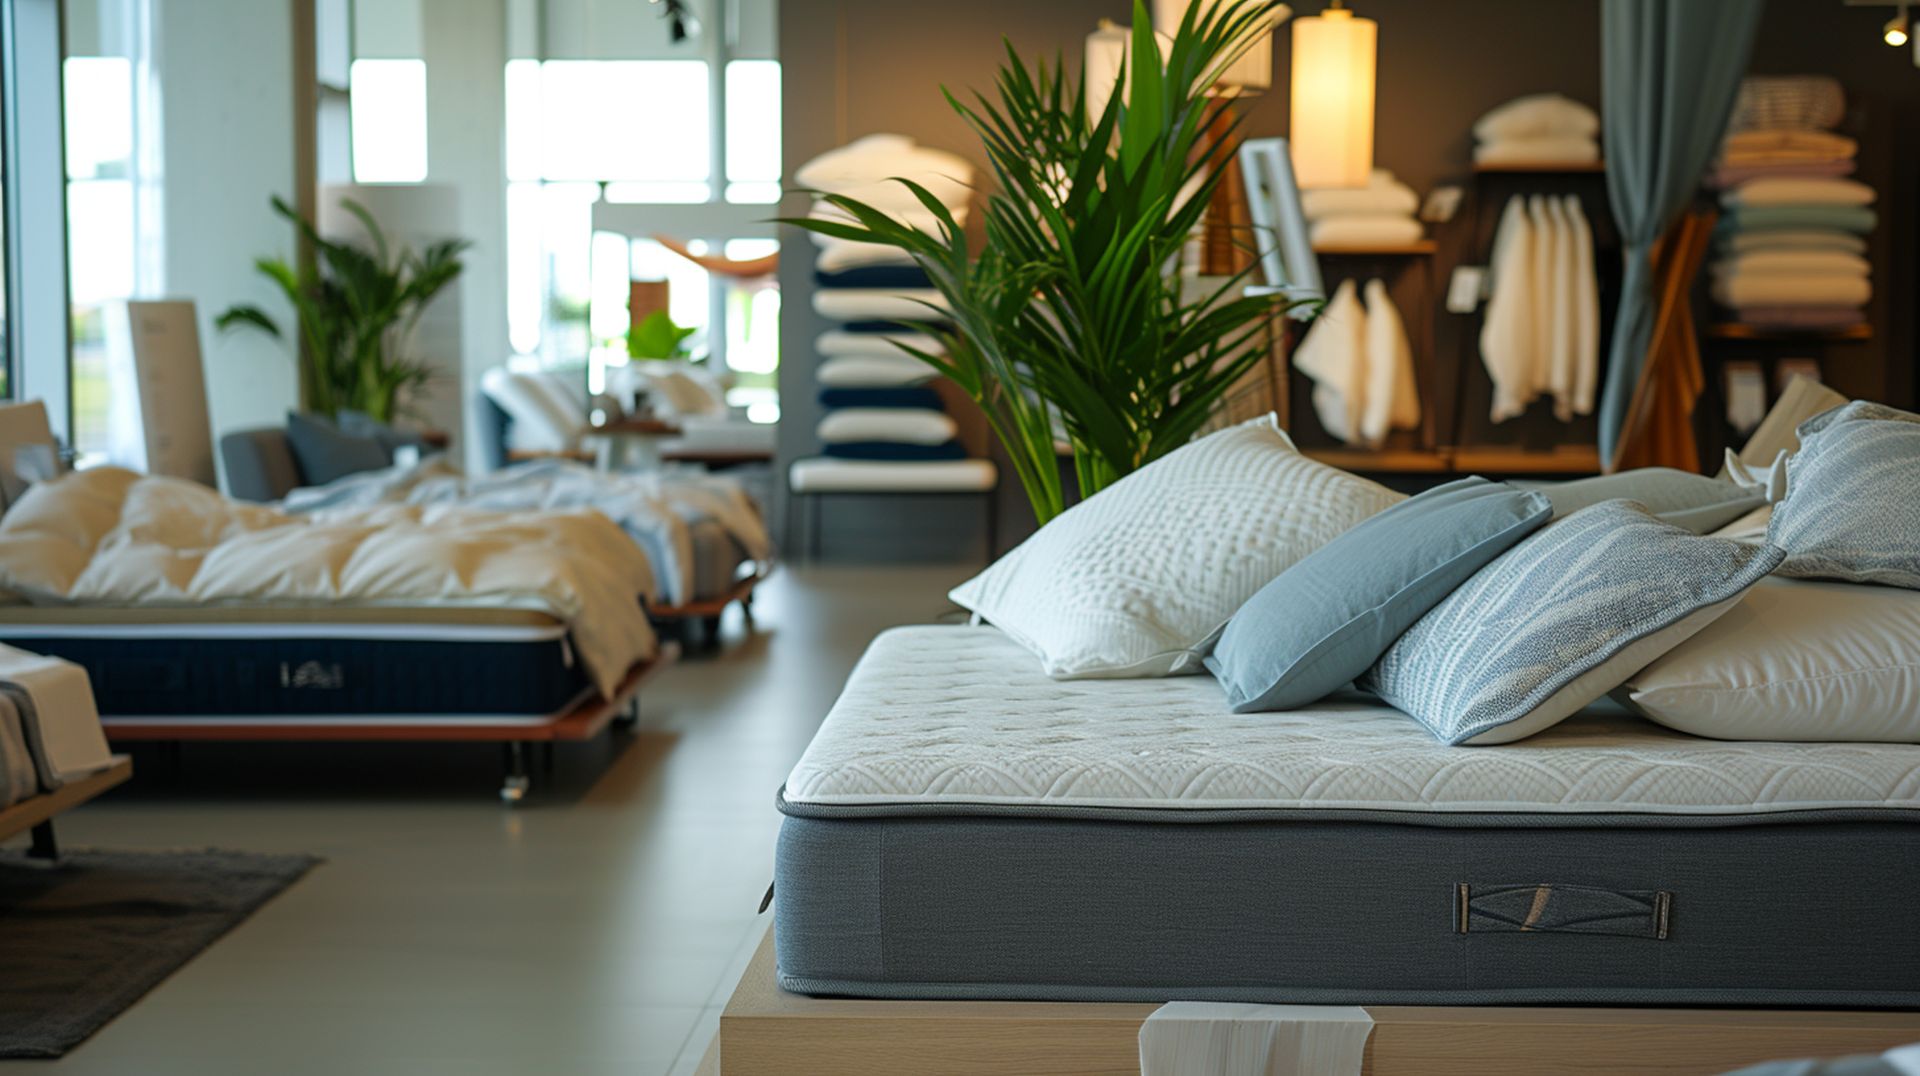 If you're looking for a new bed, mattress stores in Santa Clarita offer the best customer and delivery service, financing, and warranties in California